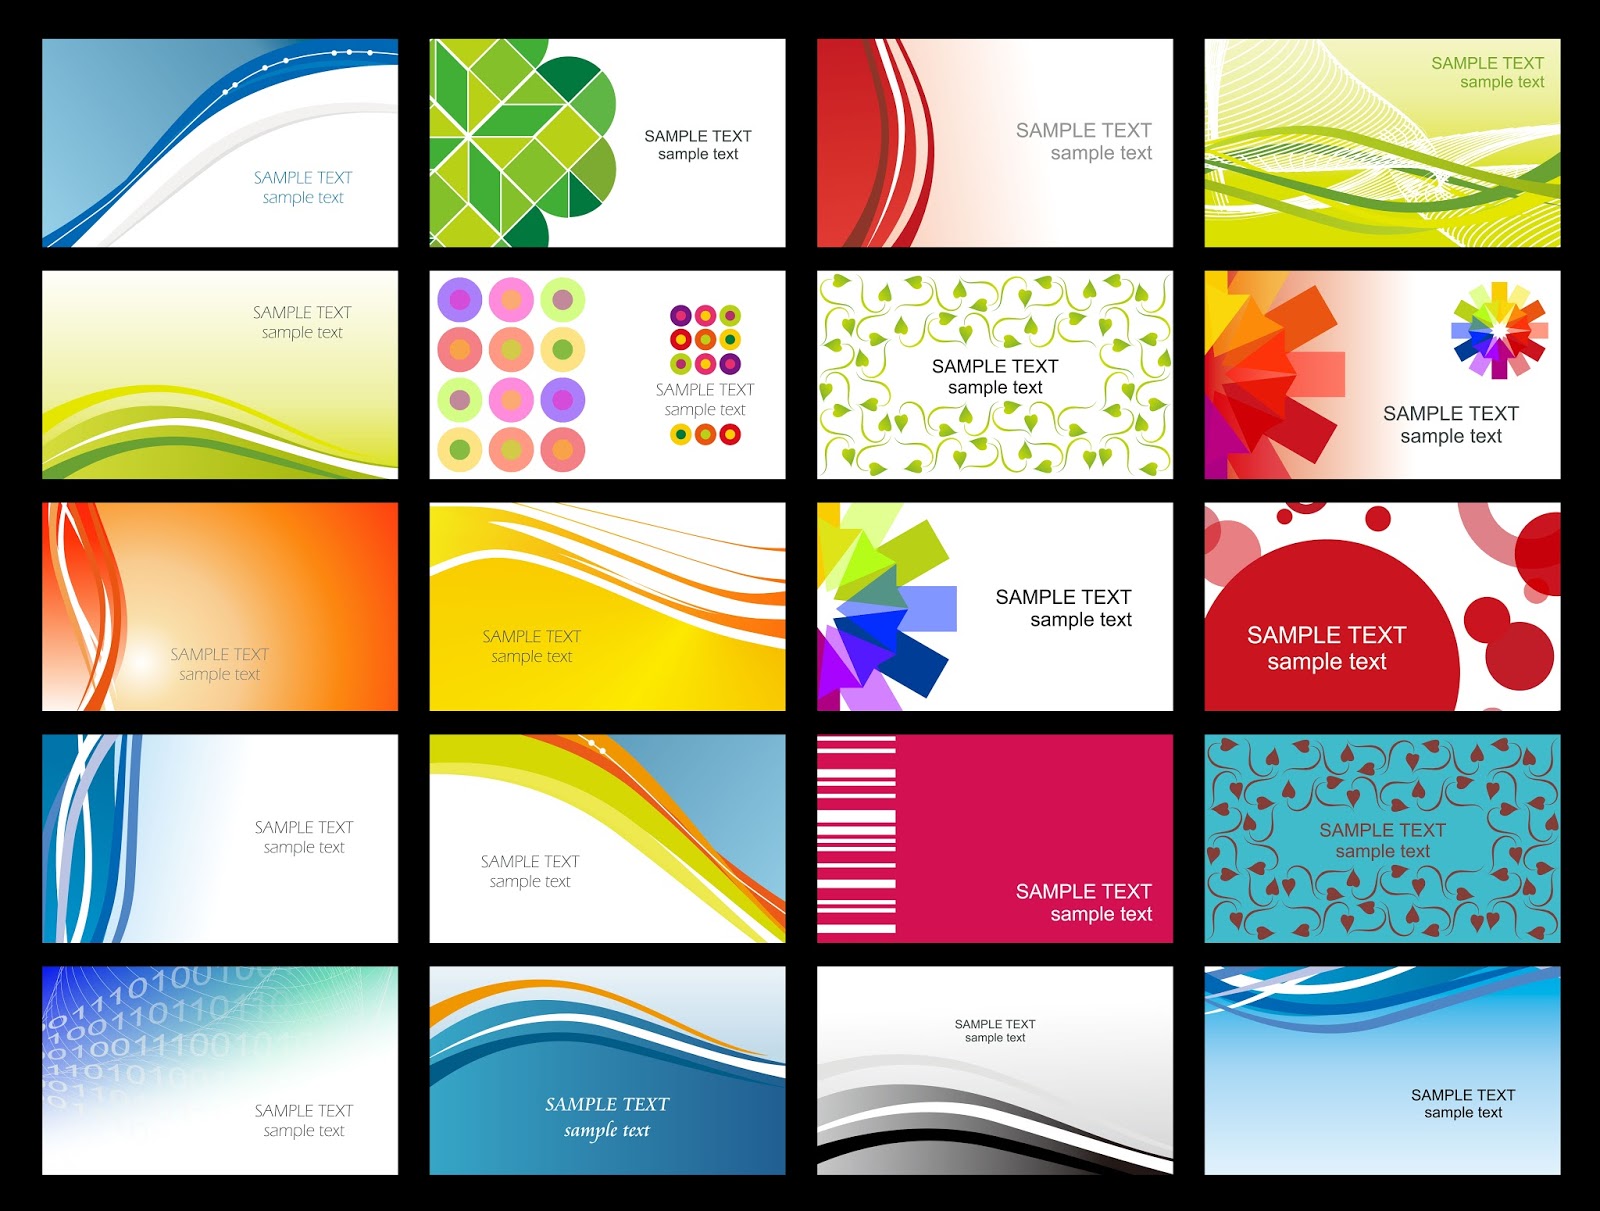 Business Cards With Photo Templates Free Free Printable Templates